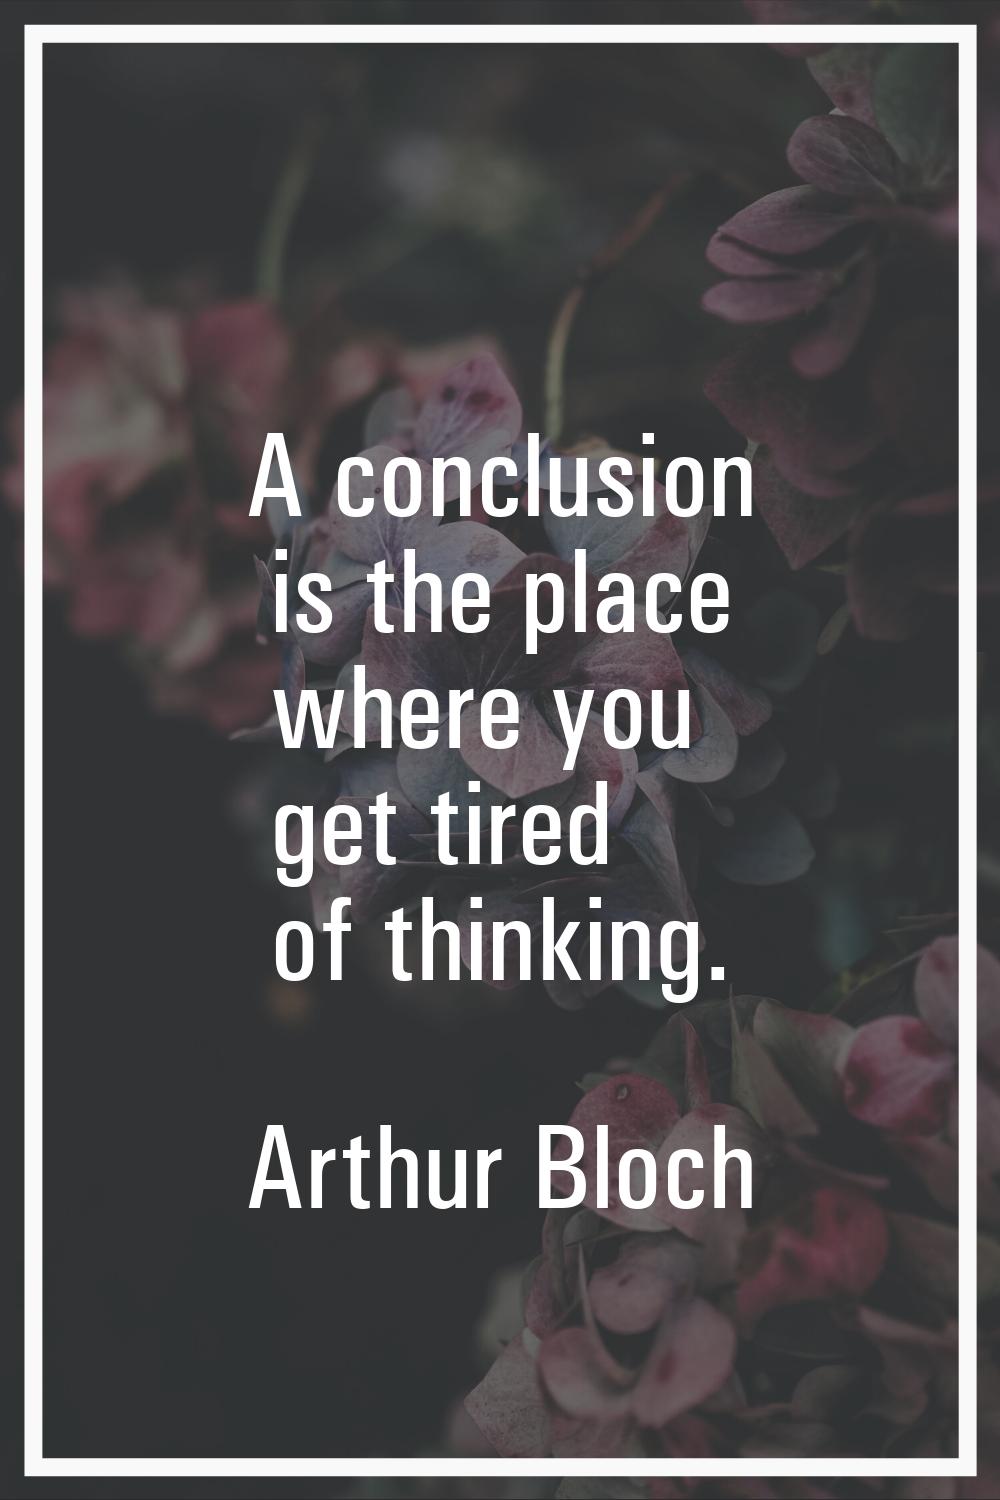 A conclusion is the place where you get tired of thinking.